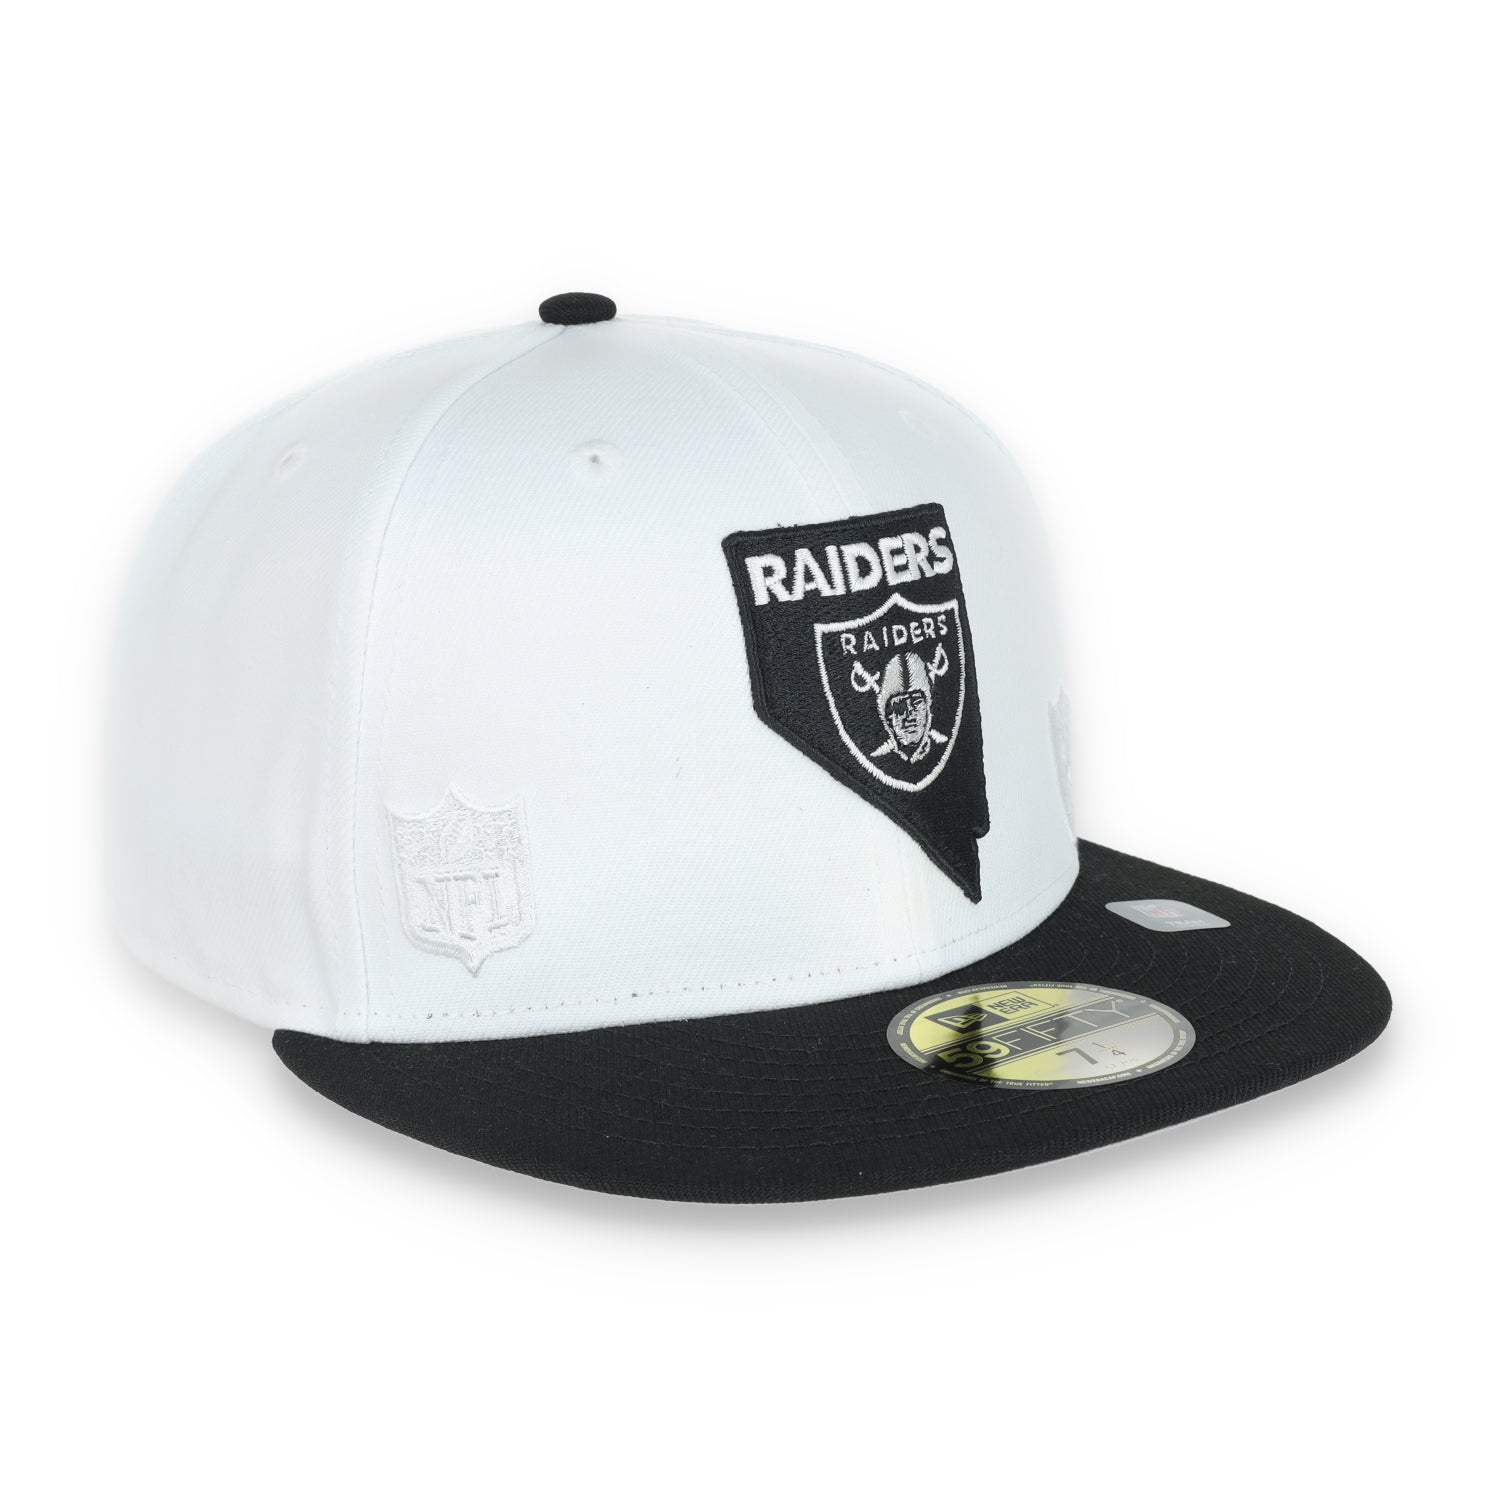 New Era Las Vegas Raiders State E1 59FIFTY Fitted Hat-White/Black